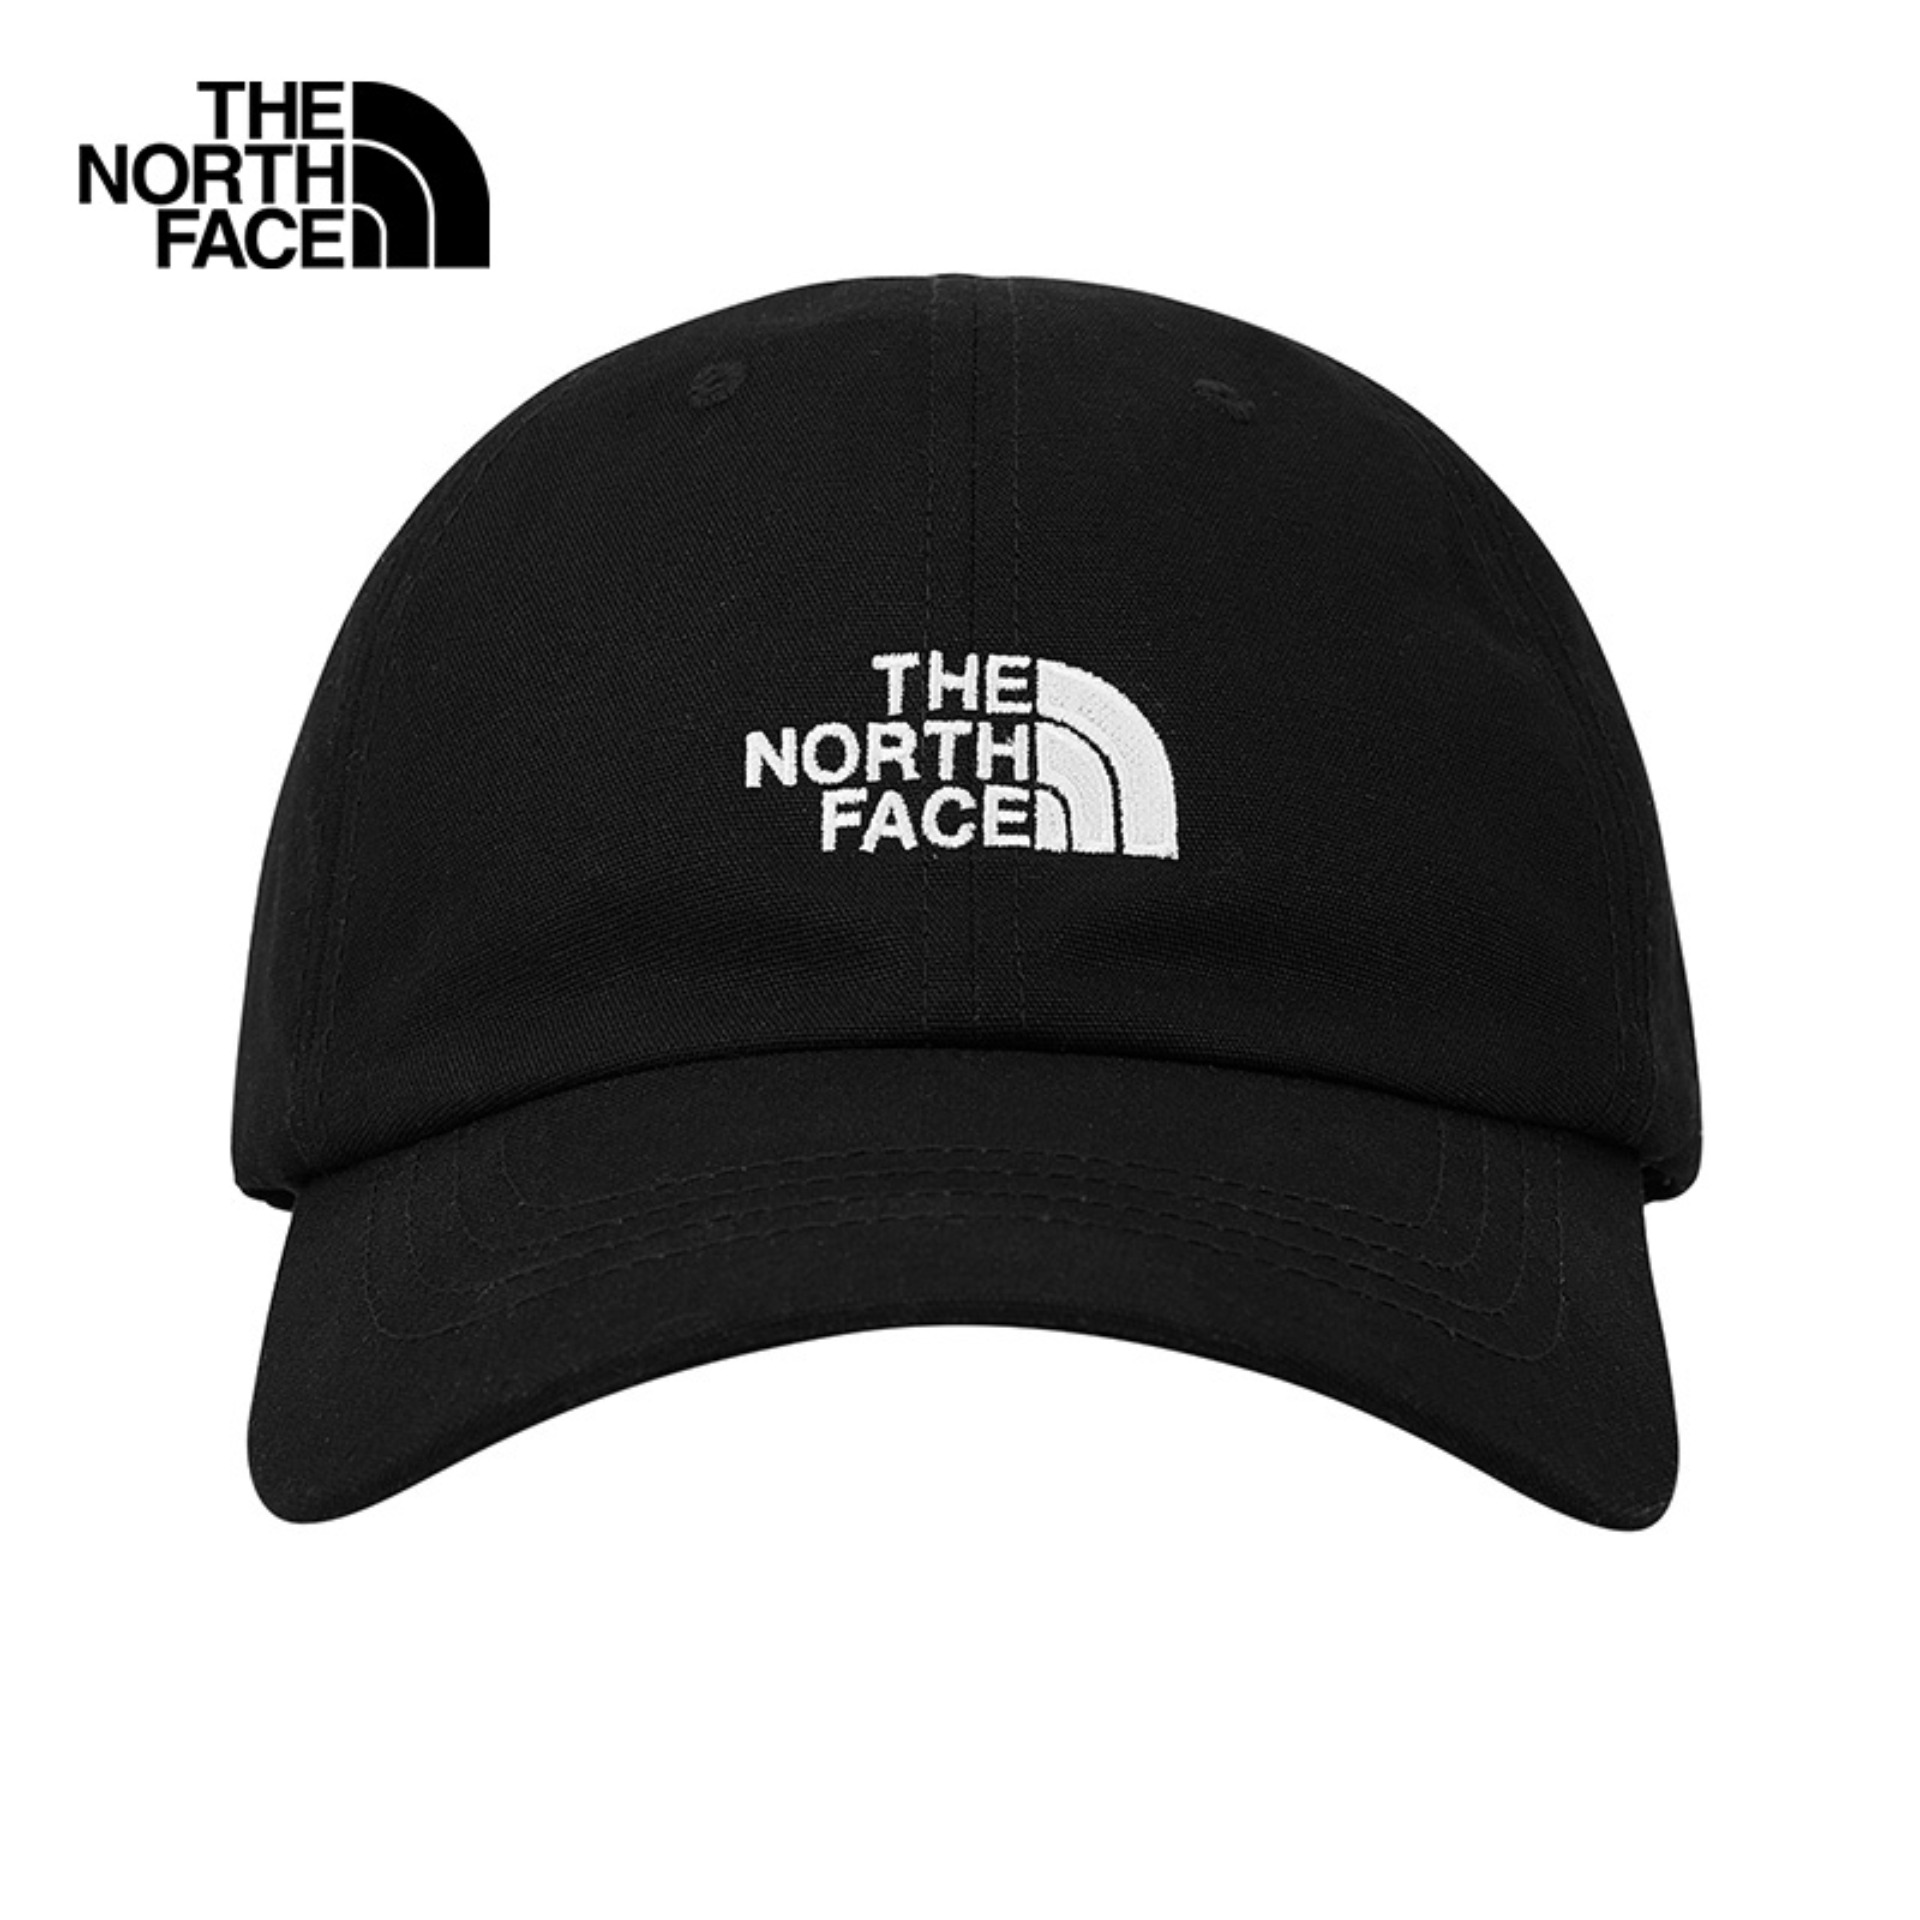 Buy The North Face Top Products Online 